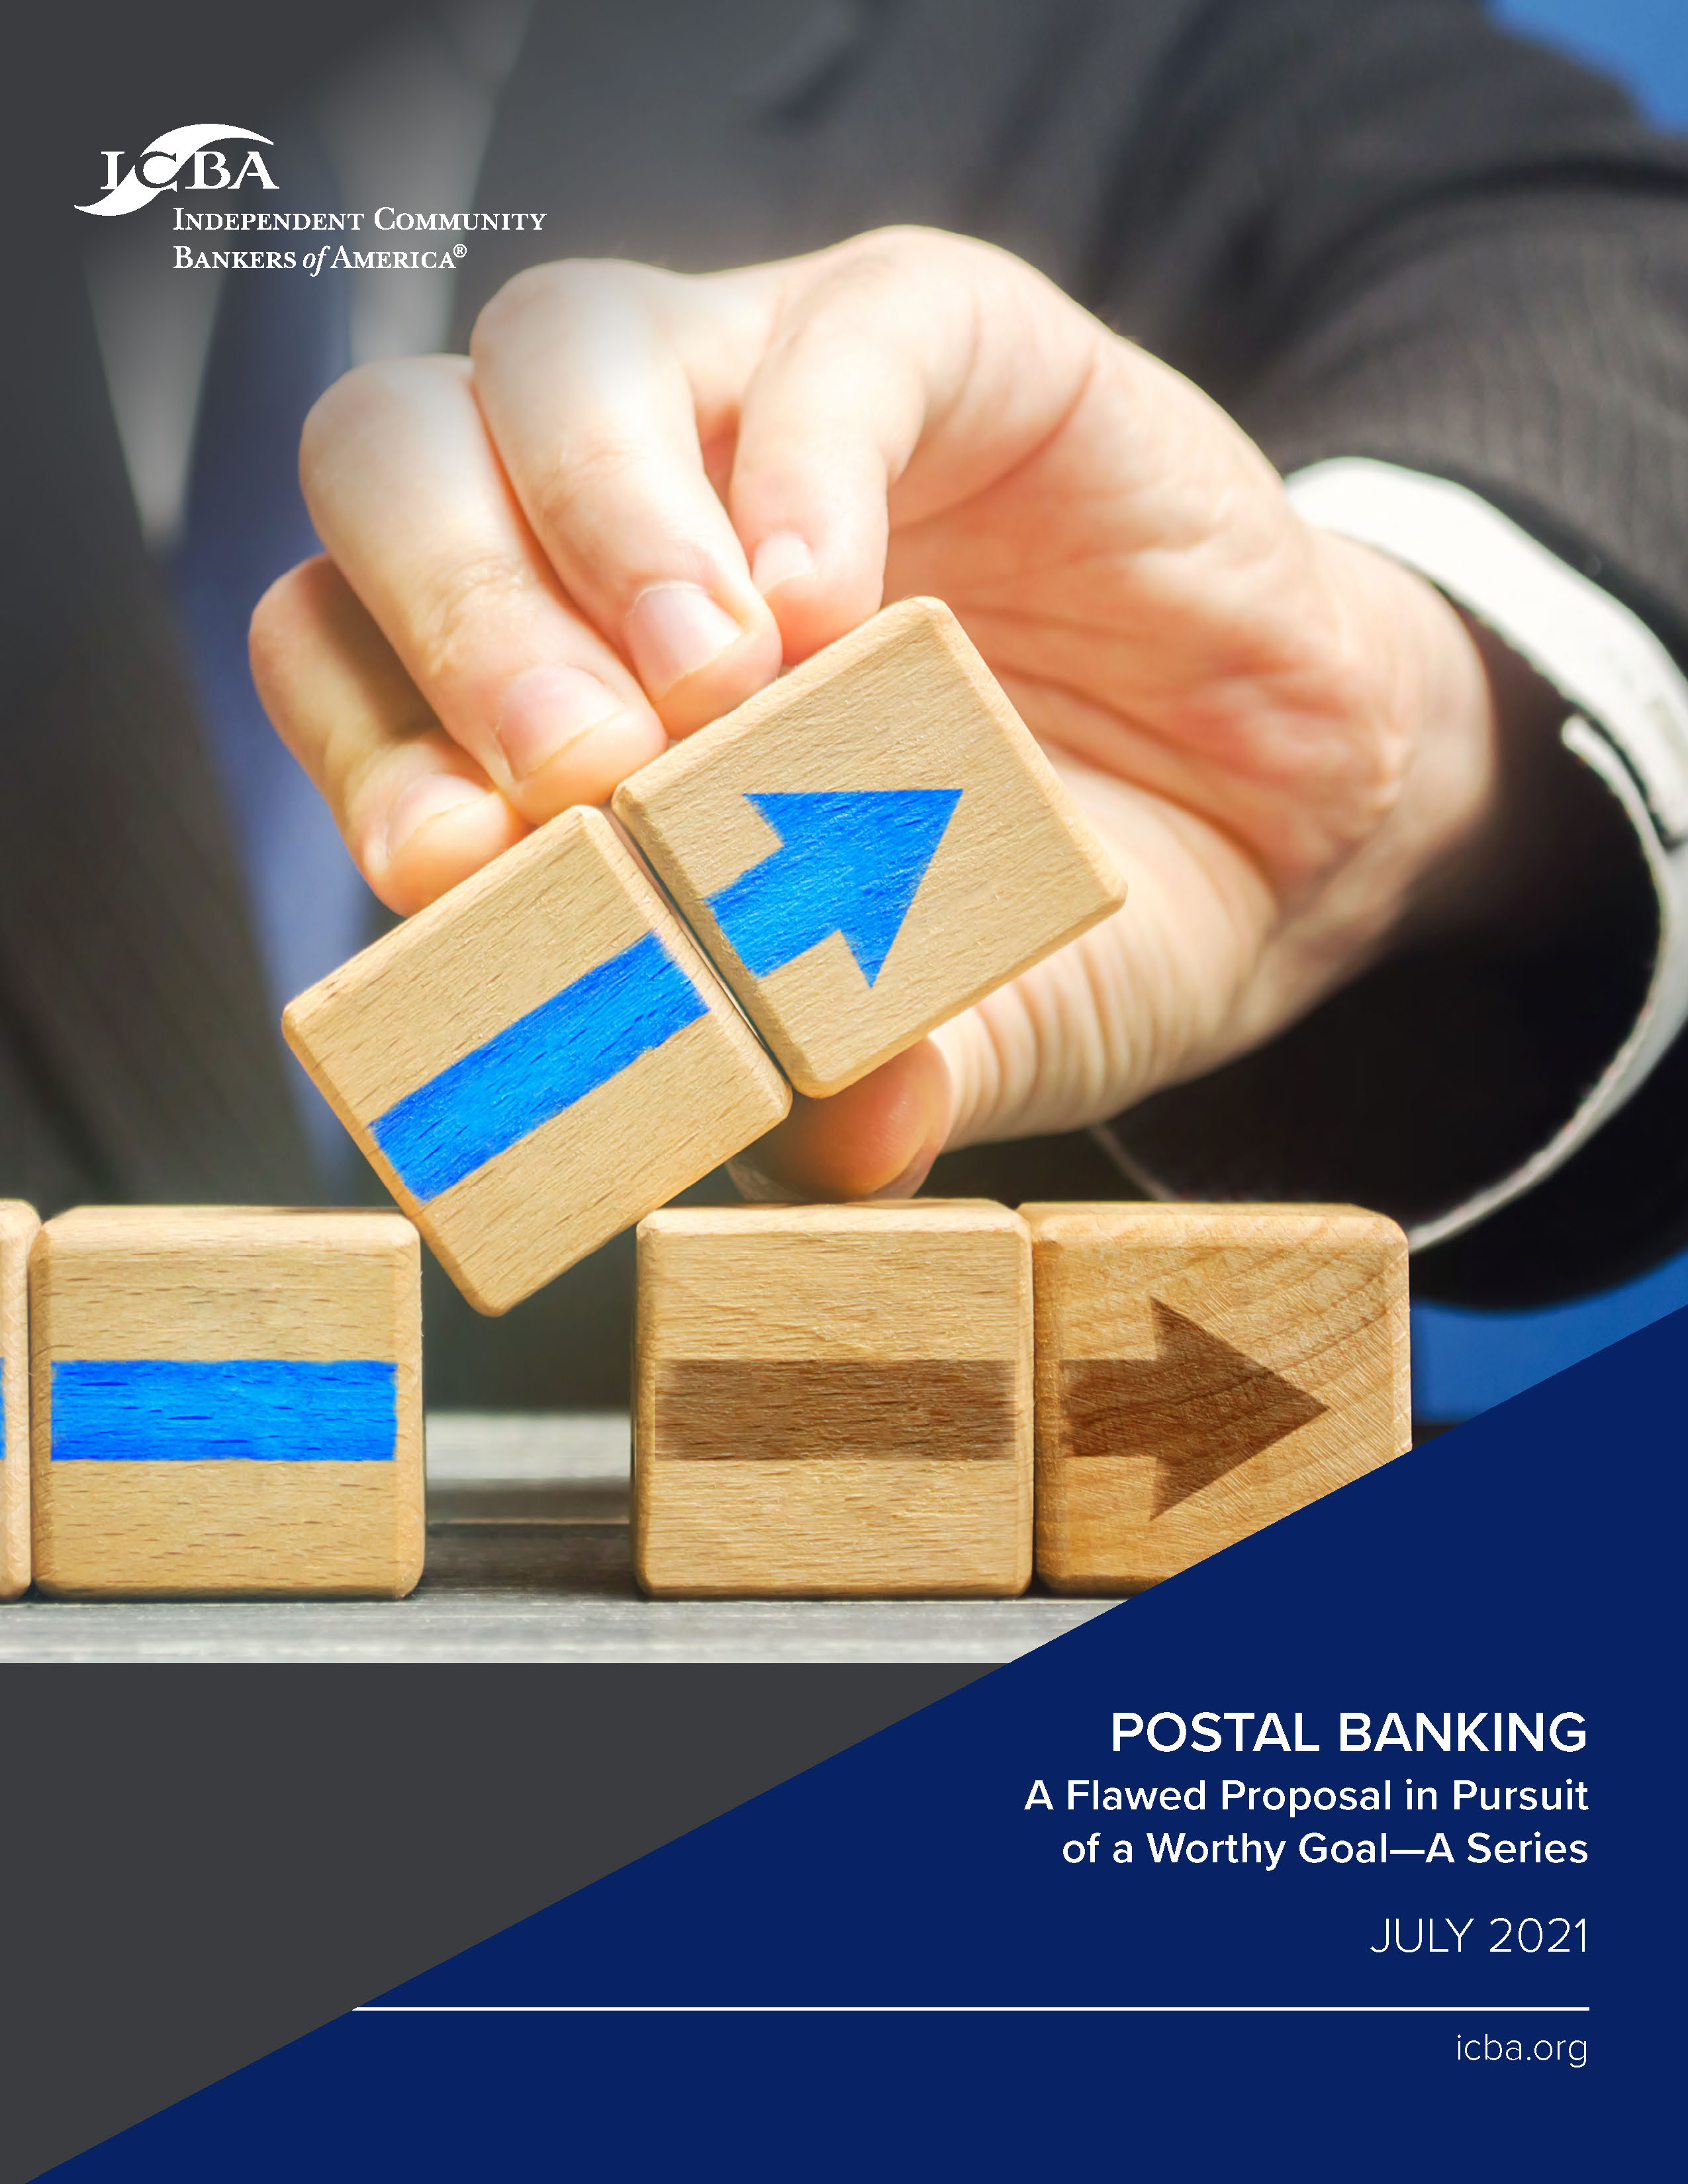 POSTAL BANKING A Flawed Proposal in Pursuit of a Worthy Goal—A Series